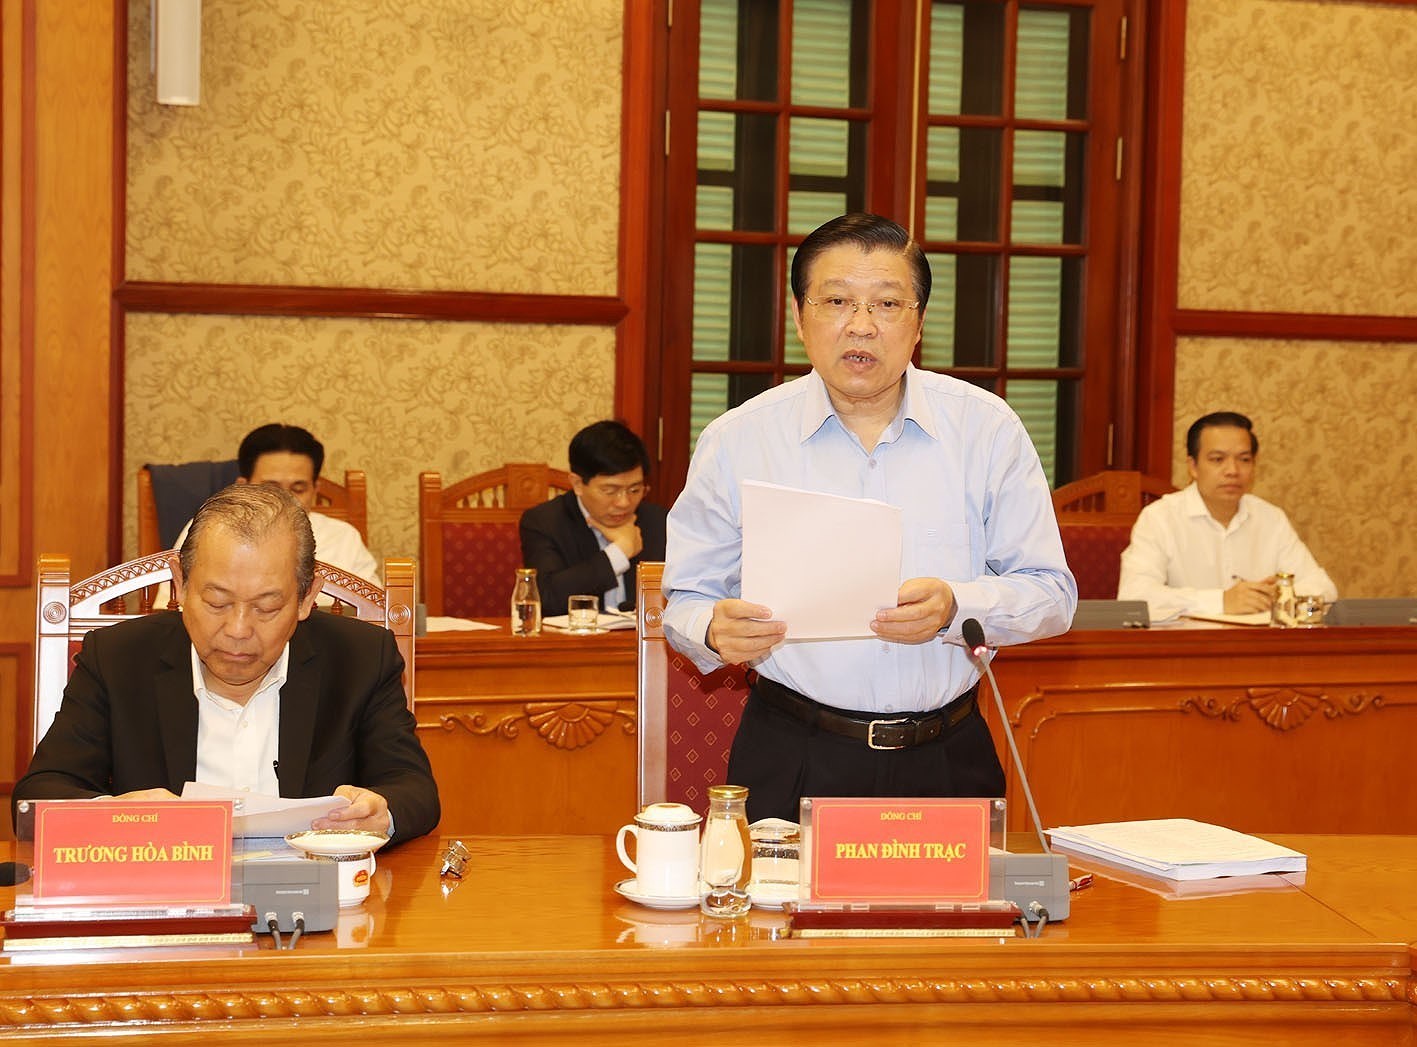 Party chief chairs meeting of Central Steering Committee for Anti-Corruption hinh anh 4